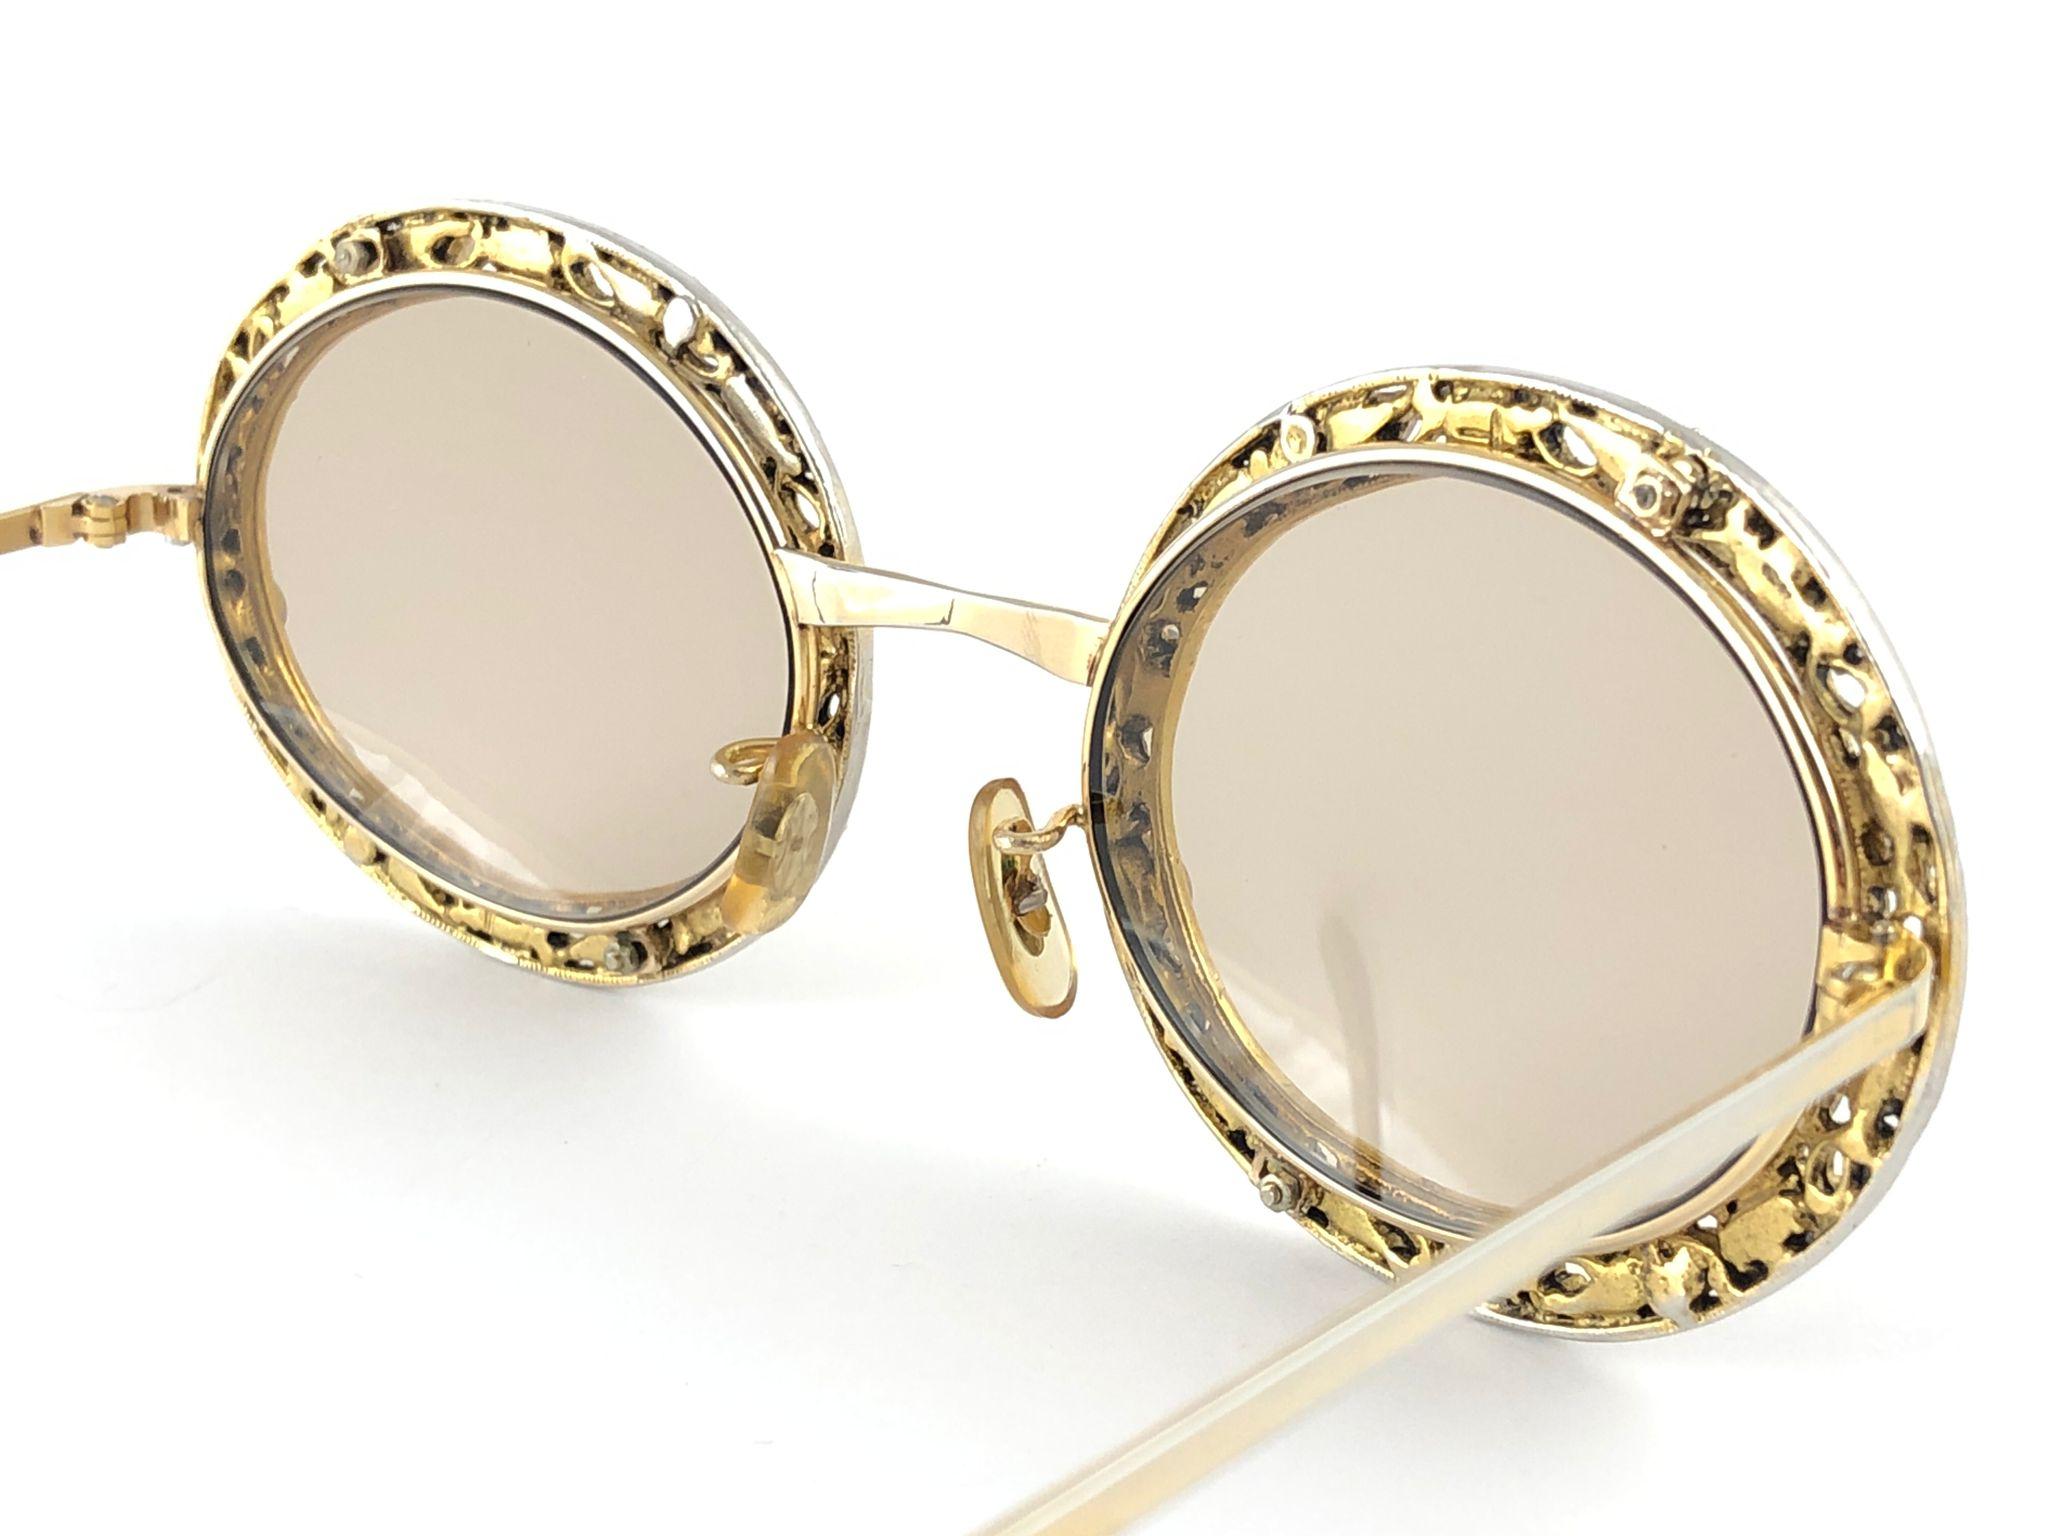 Ultra Rare 1960 Tura Jewelled Opal Accented Frame Archive Dior Sunglasses In Excellent Condition For Sale In Baleares, Baleares